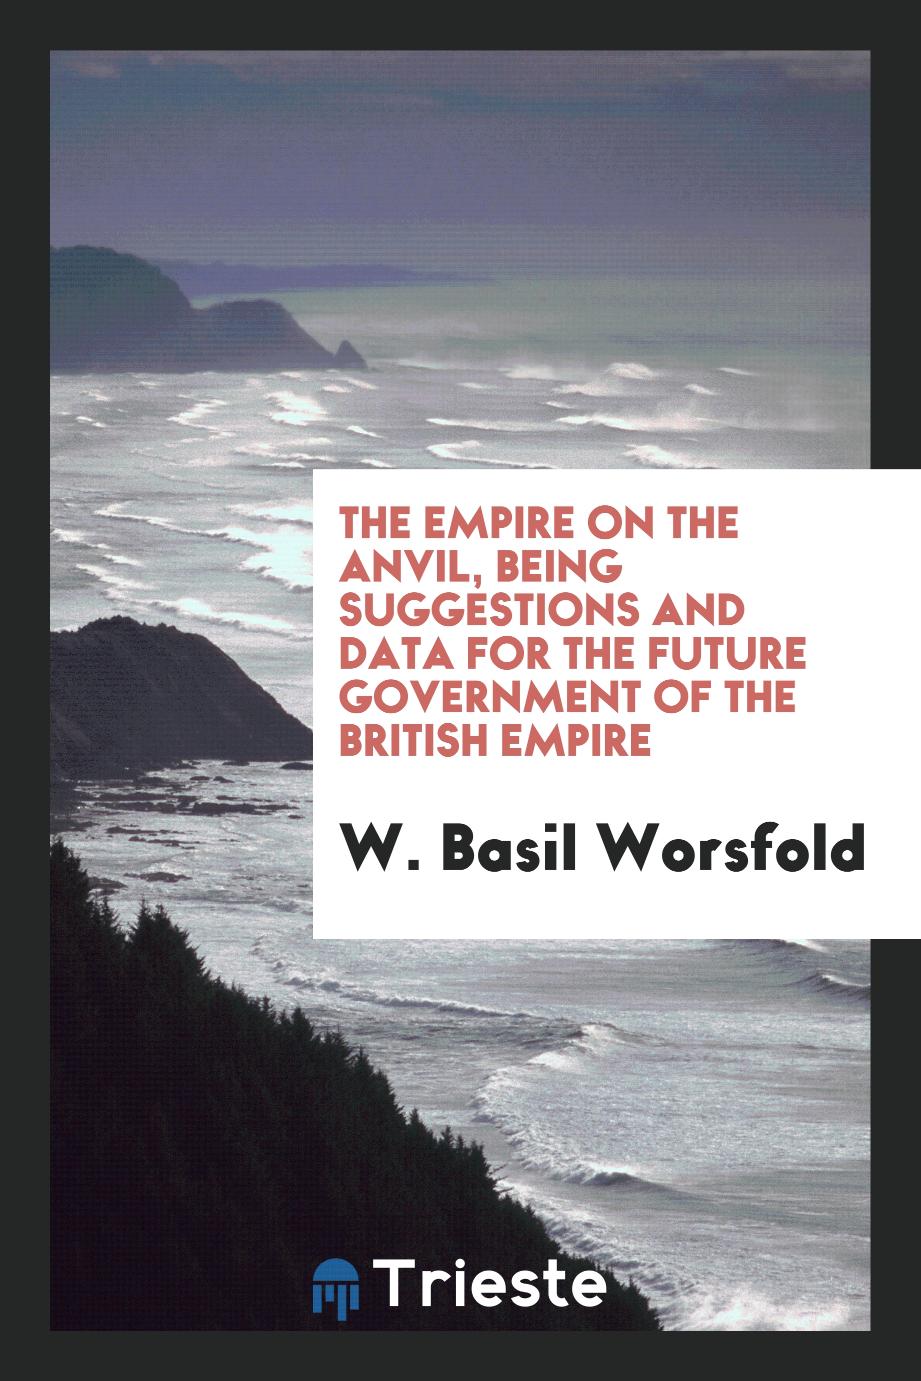 The Empire on the anvil, being suggestions and data for the future government of the British Empire